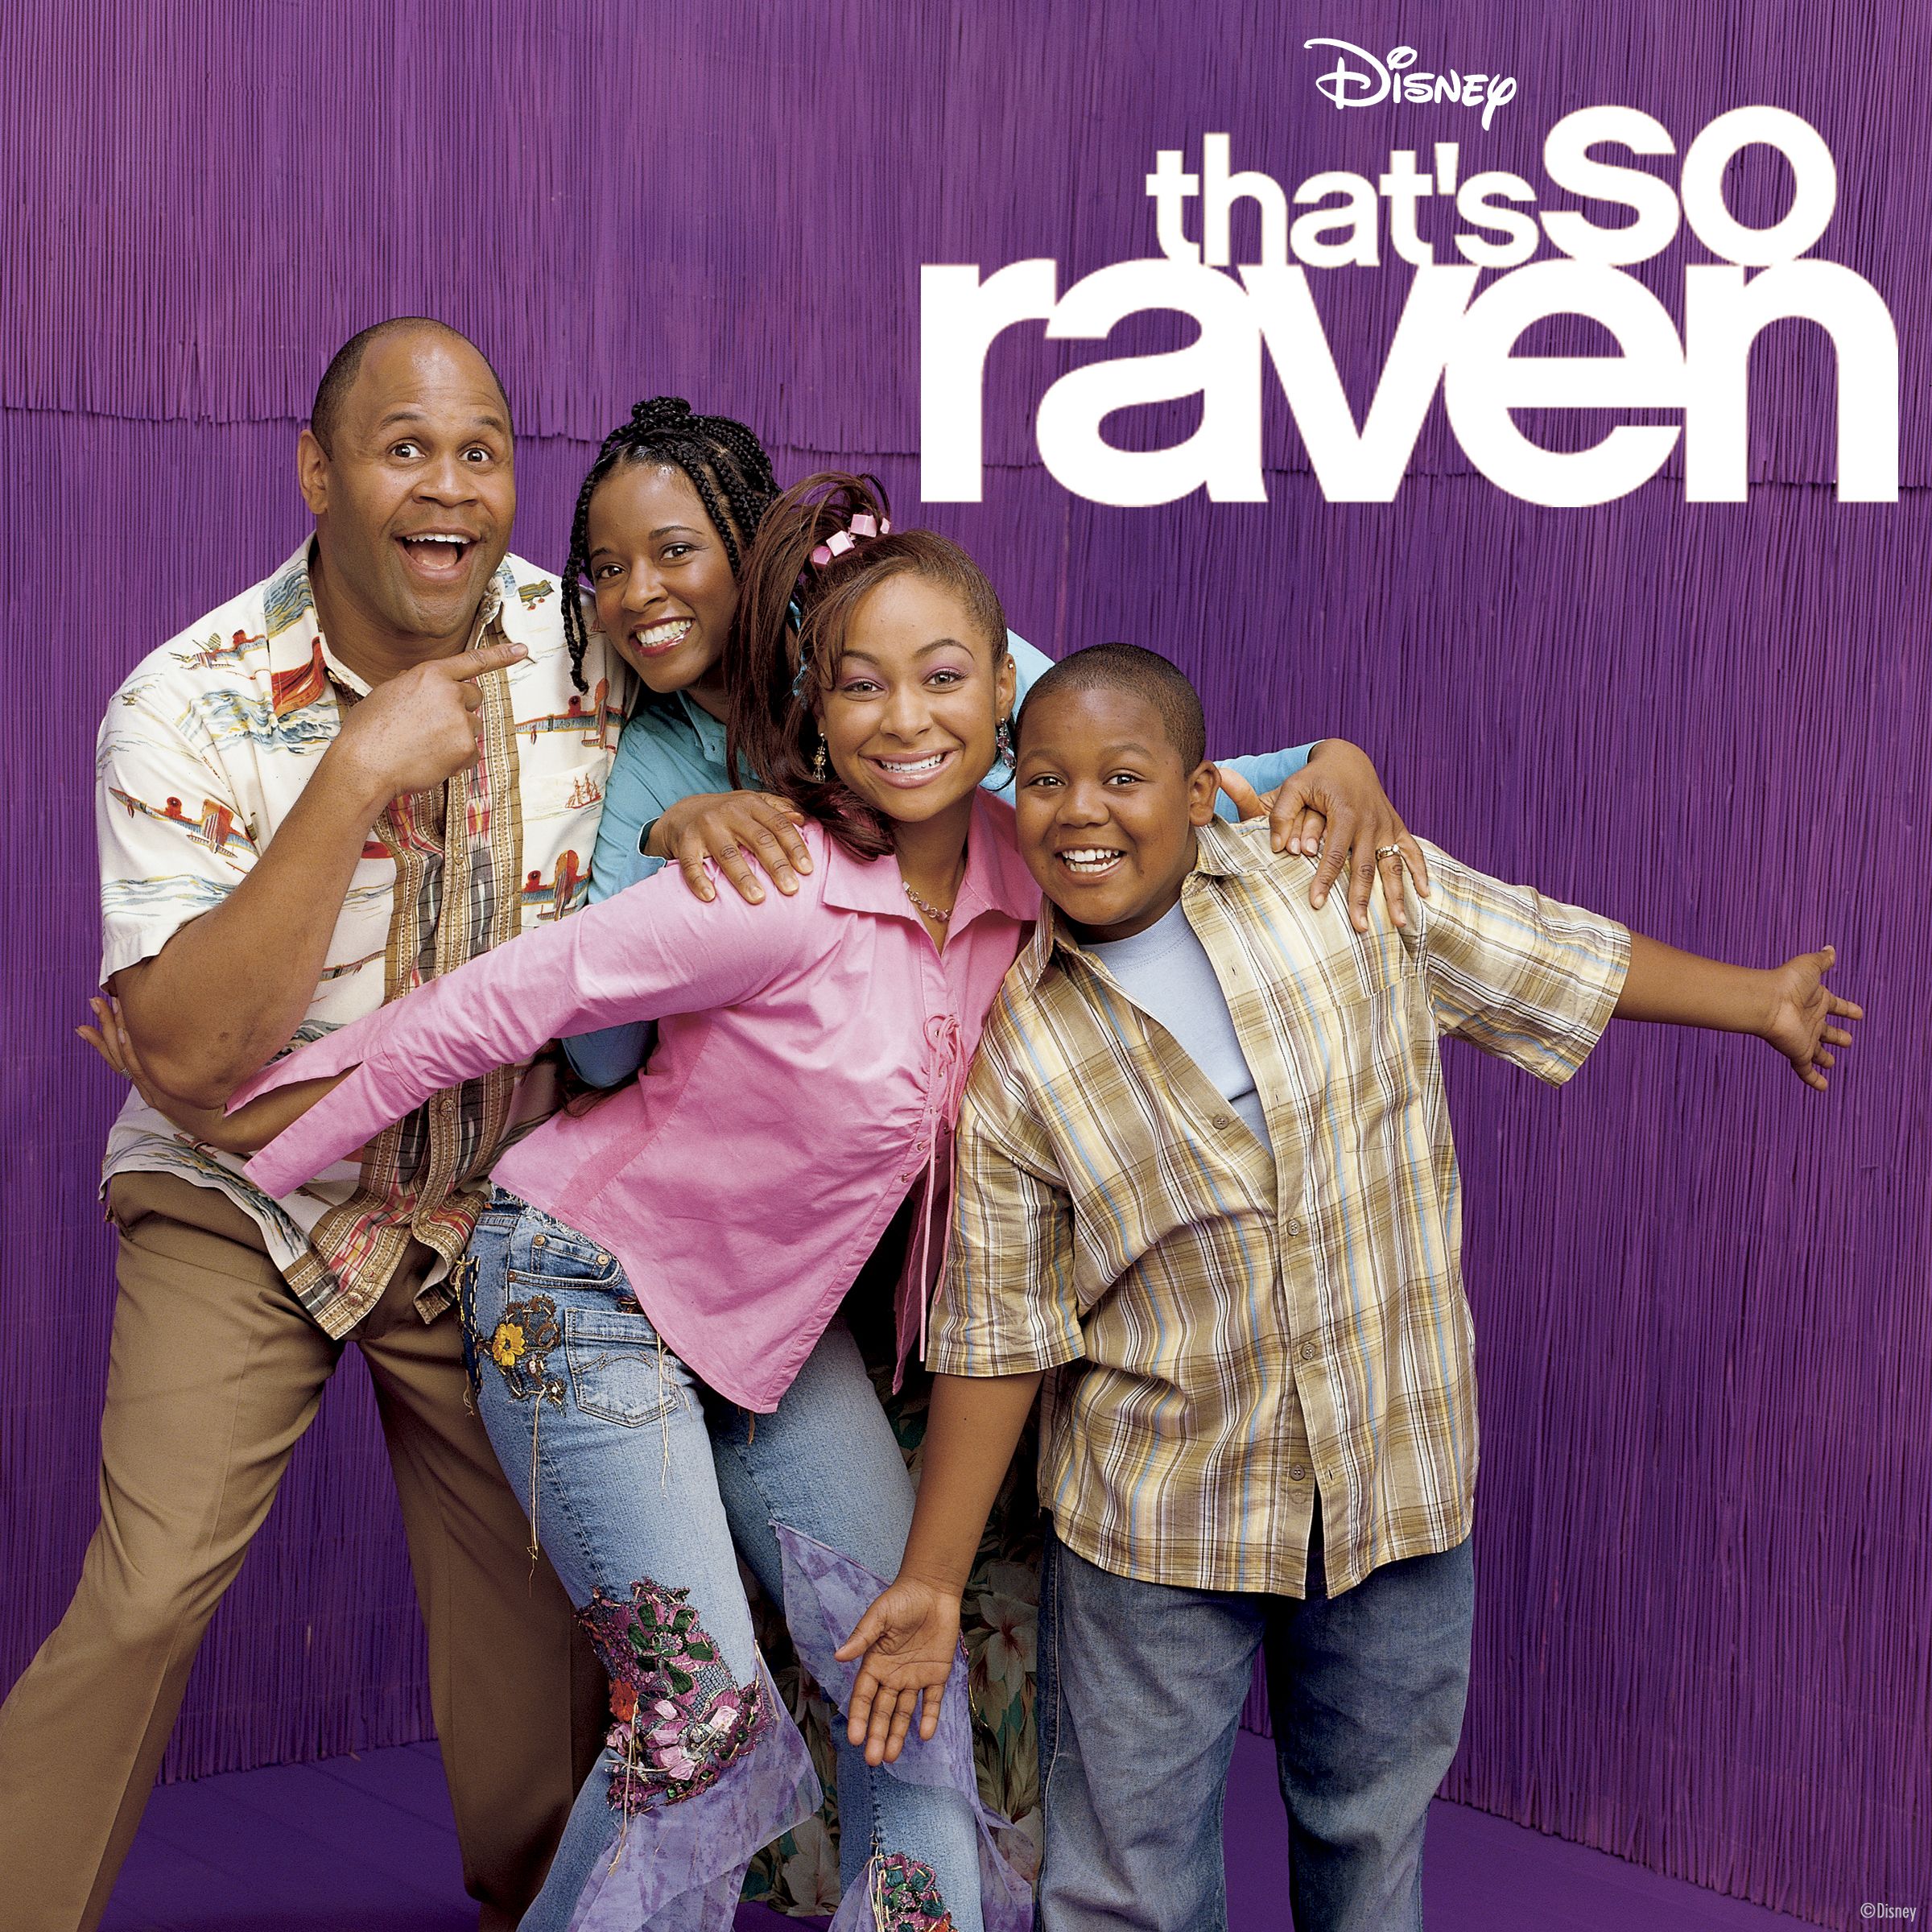 Thats so raven complete series torrent seven and a match torrent